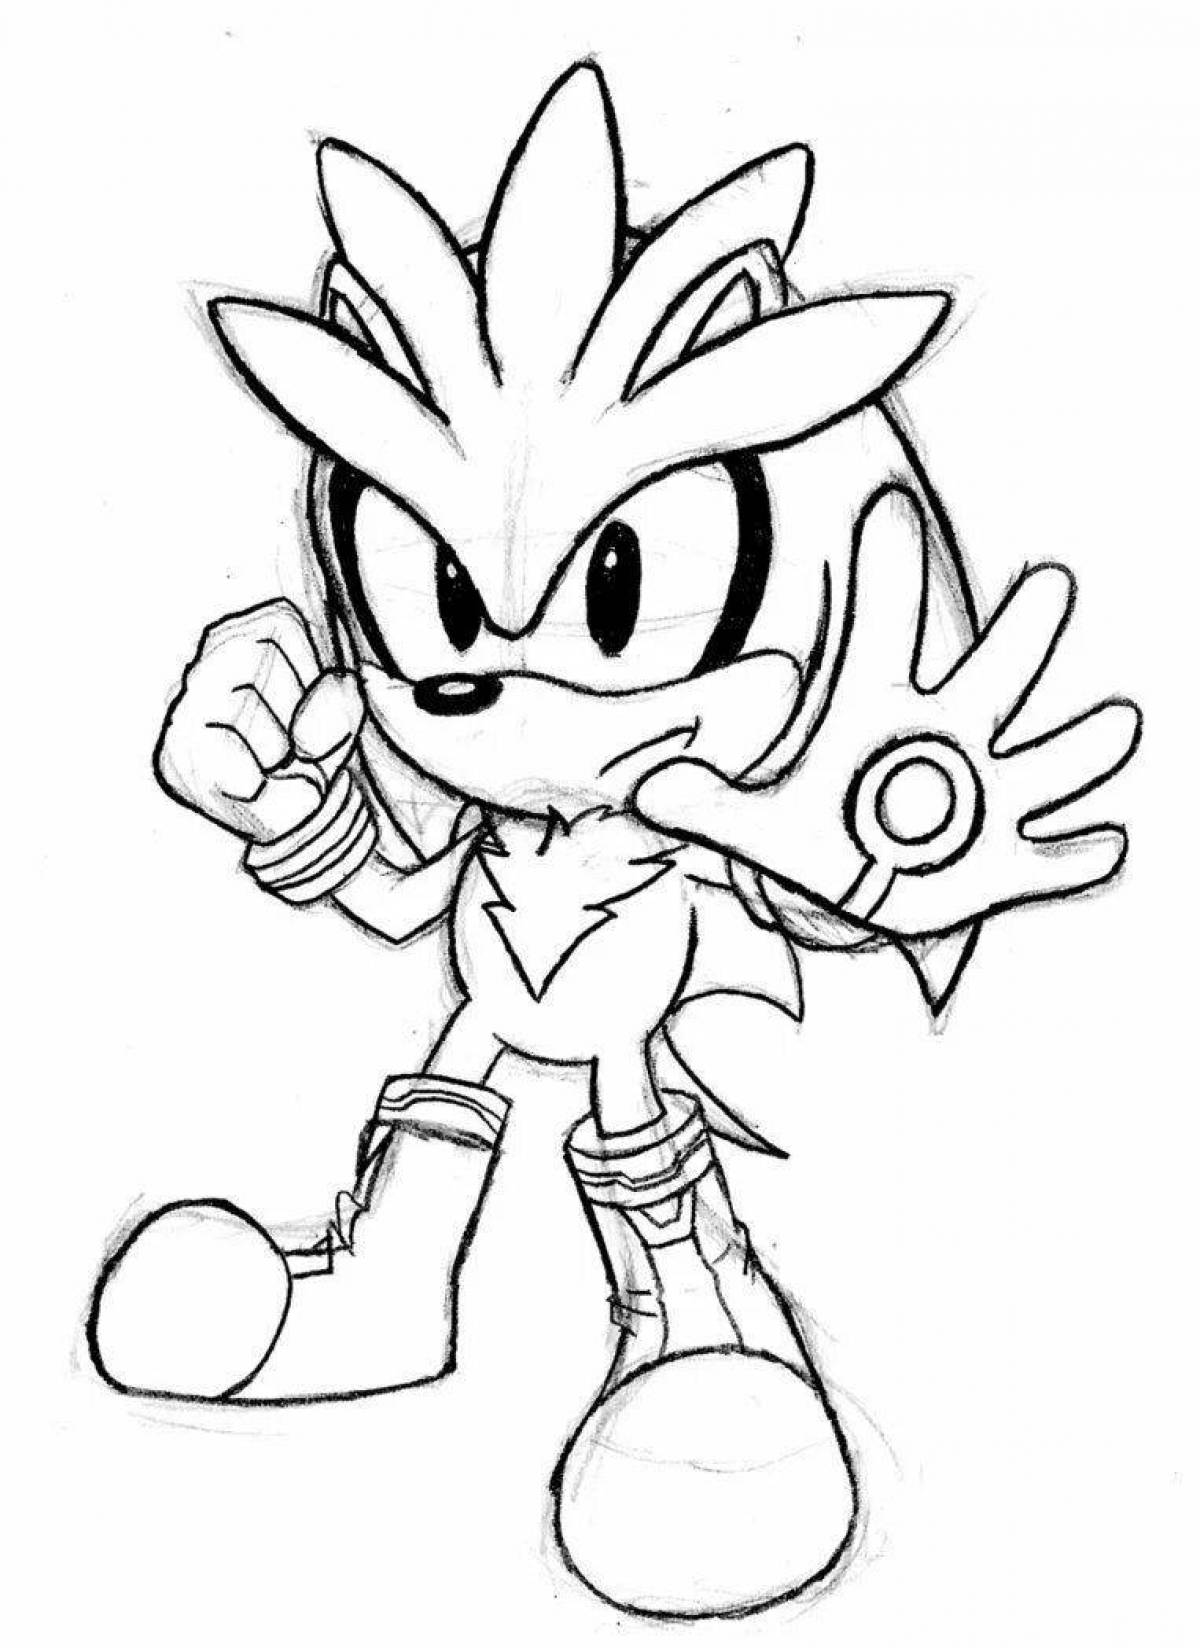 Sweet sonic shredder coloring page